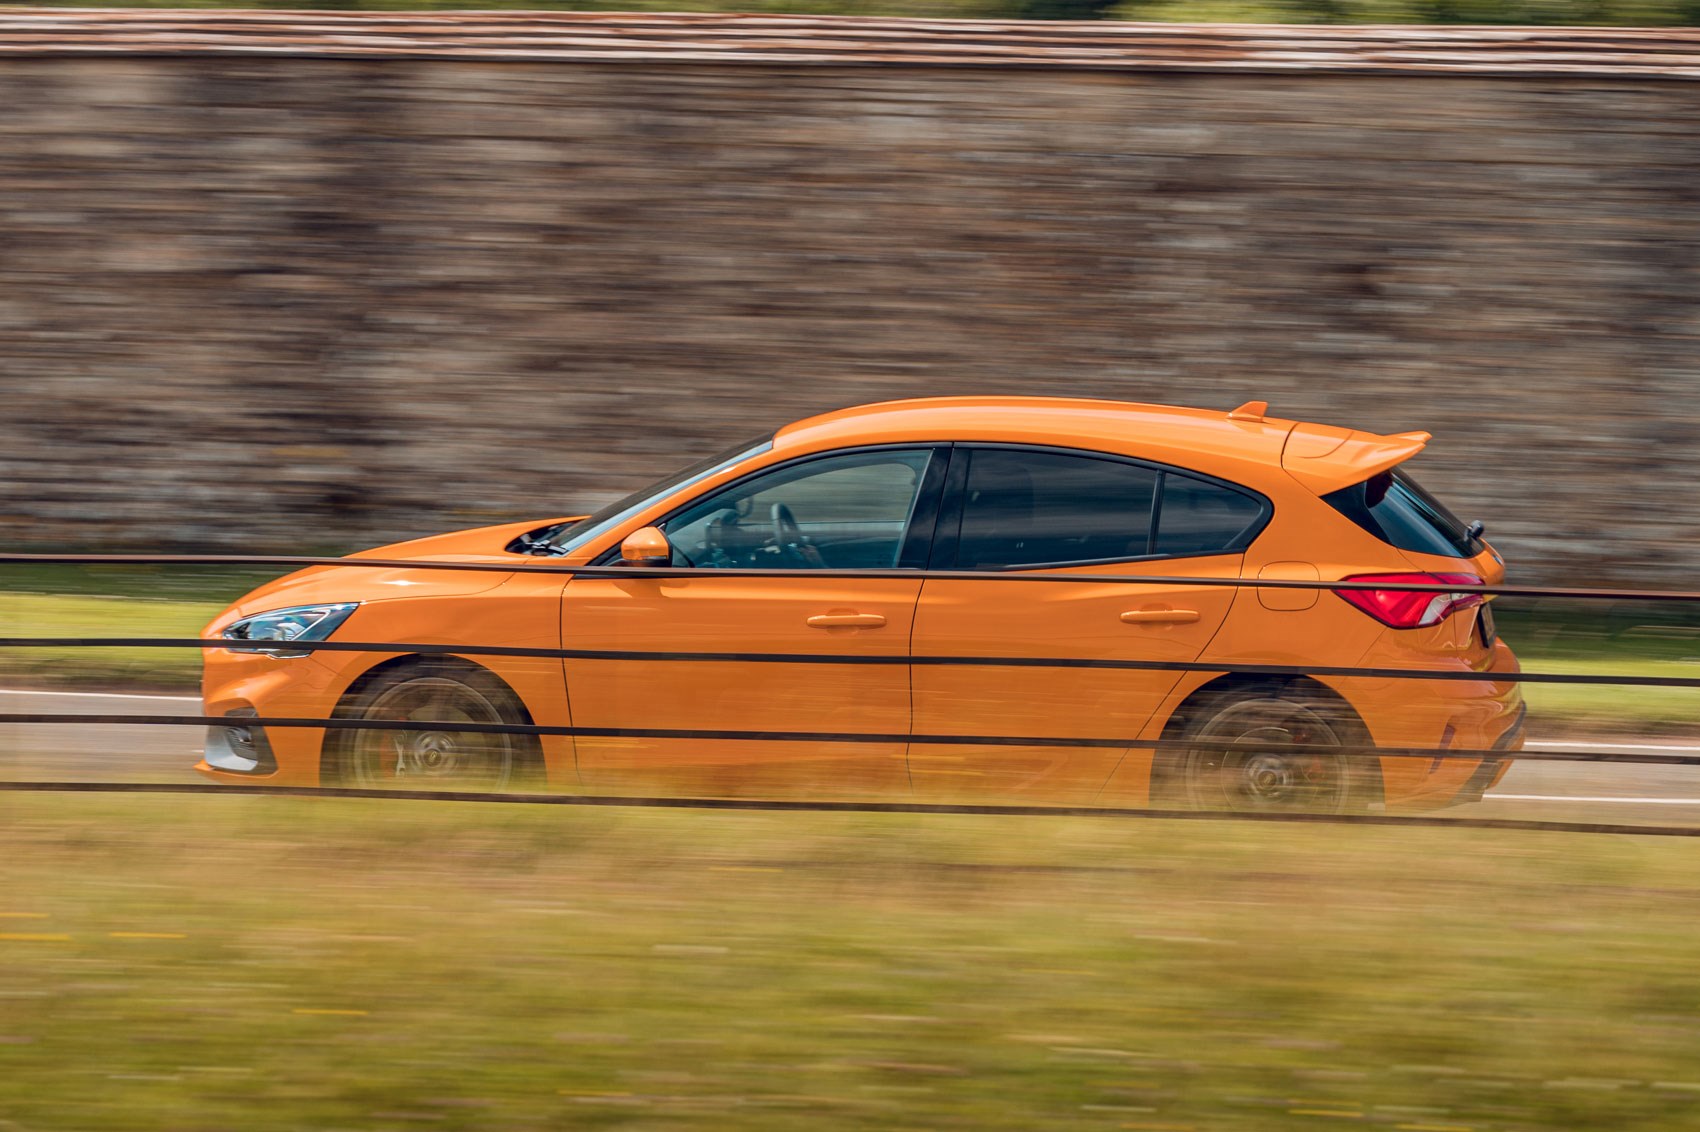 Ford Focus ST – The Time is Now